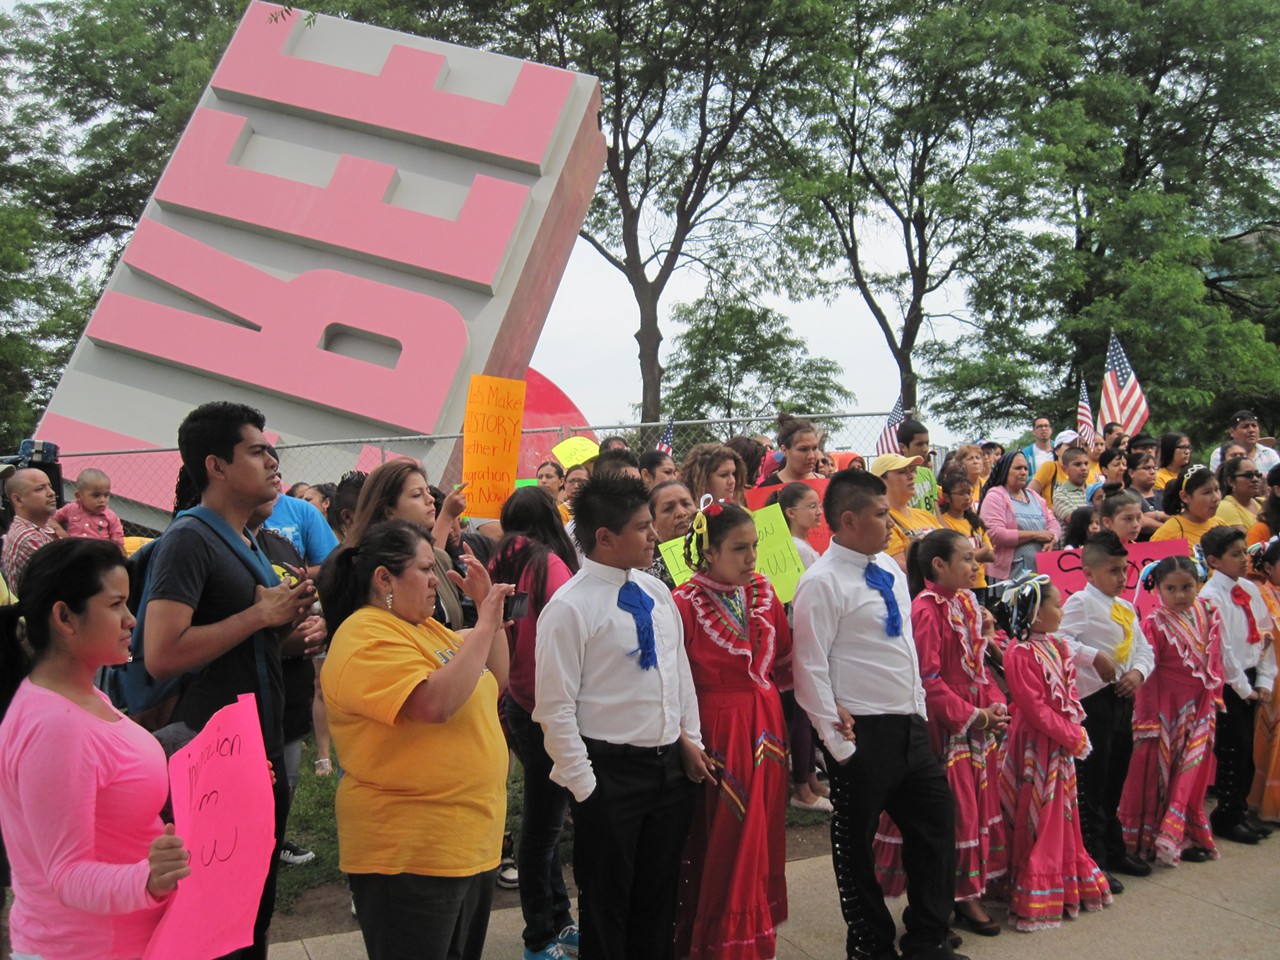 The rally, organized by HOLA in just three days, took place outside the federal building on June 9.